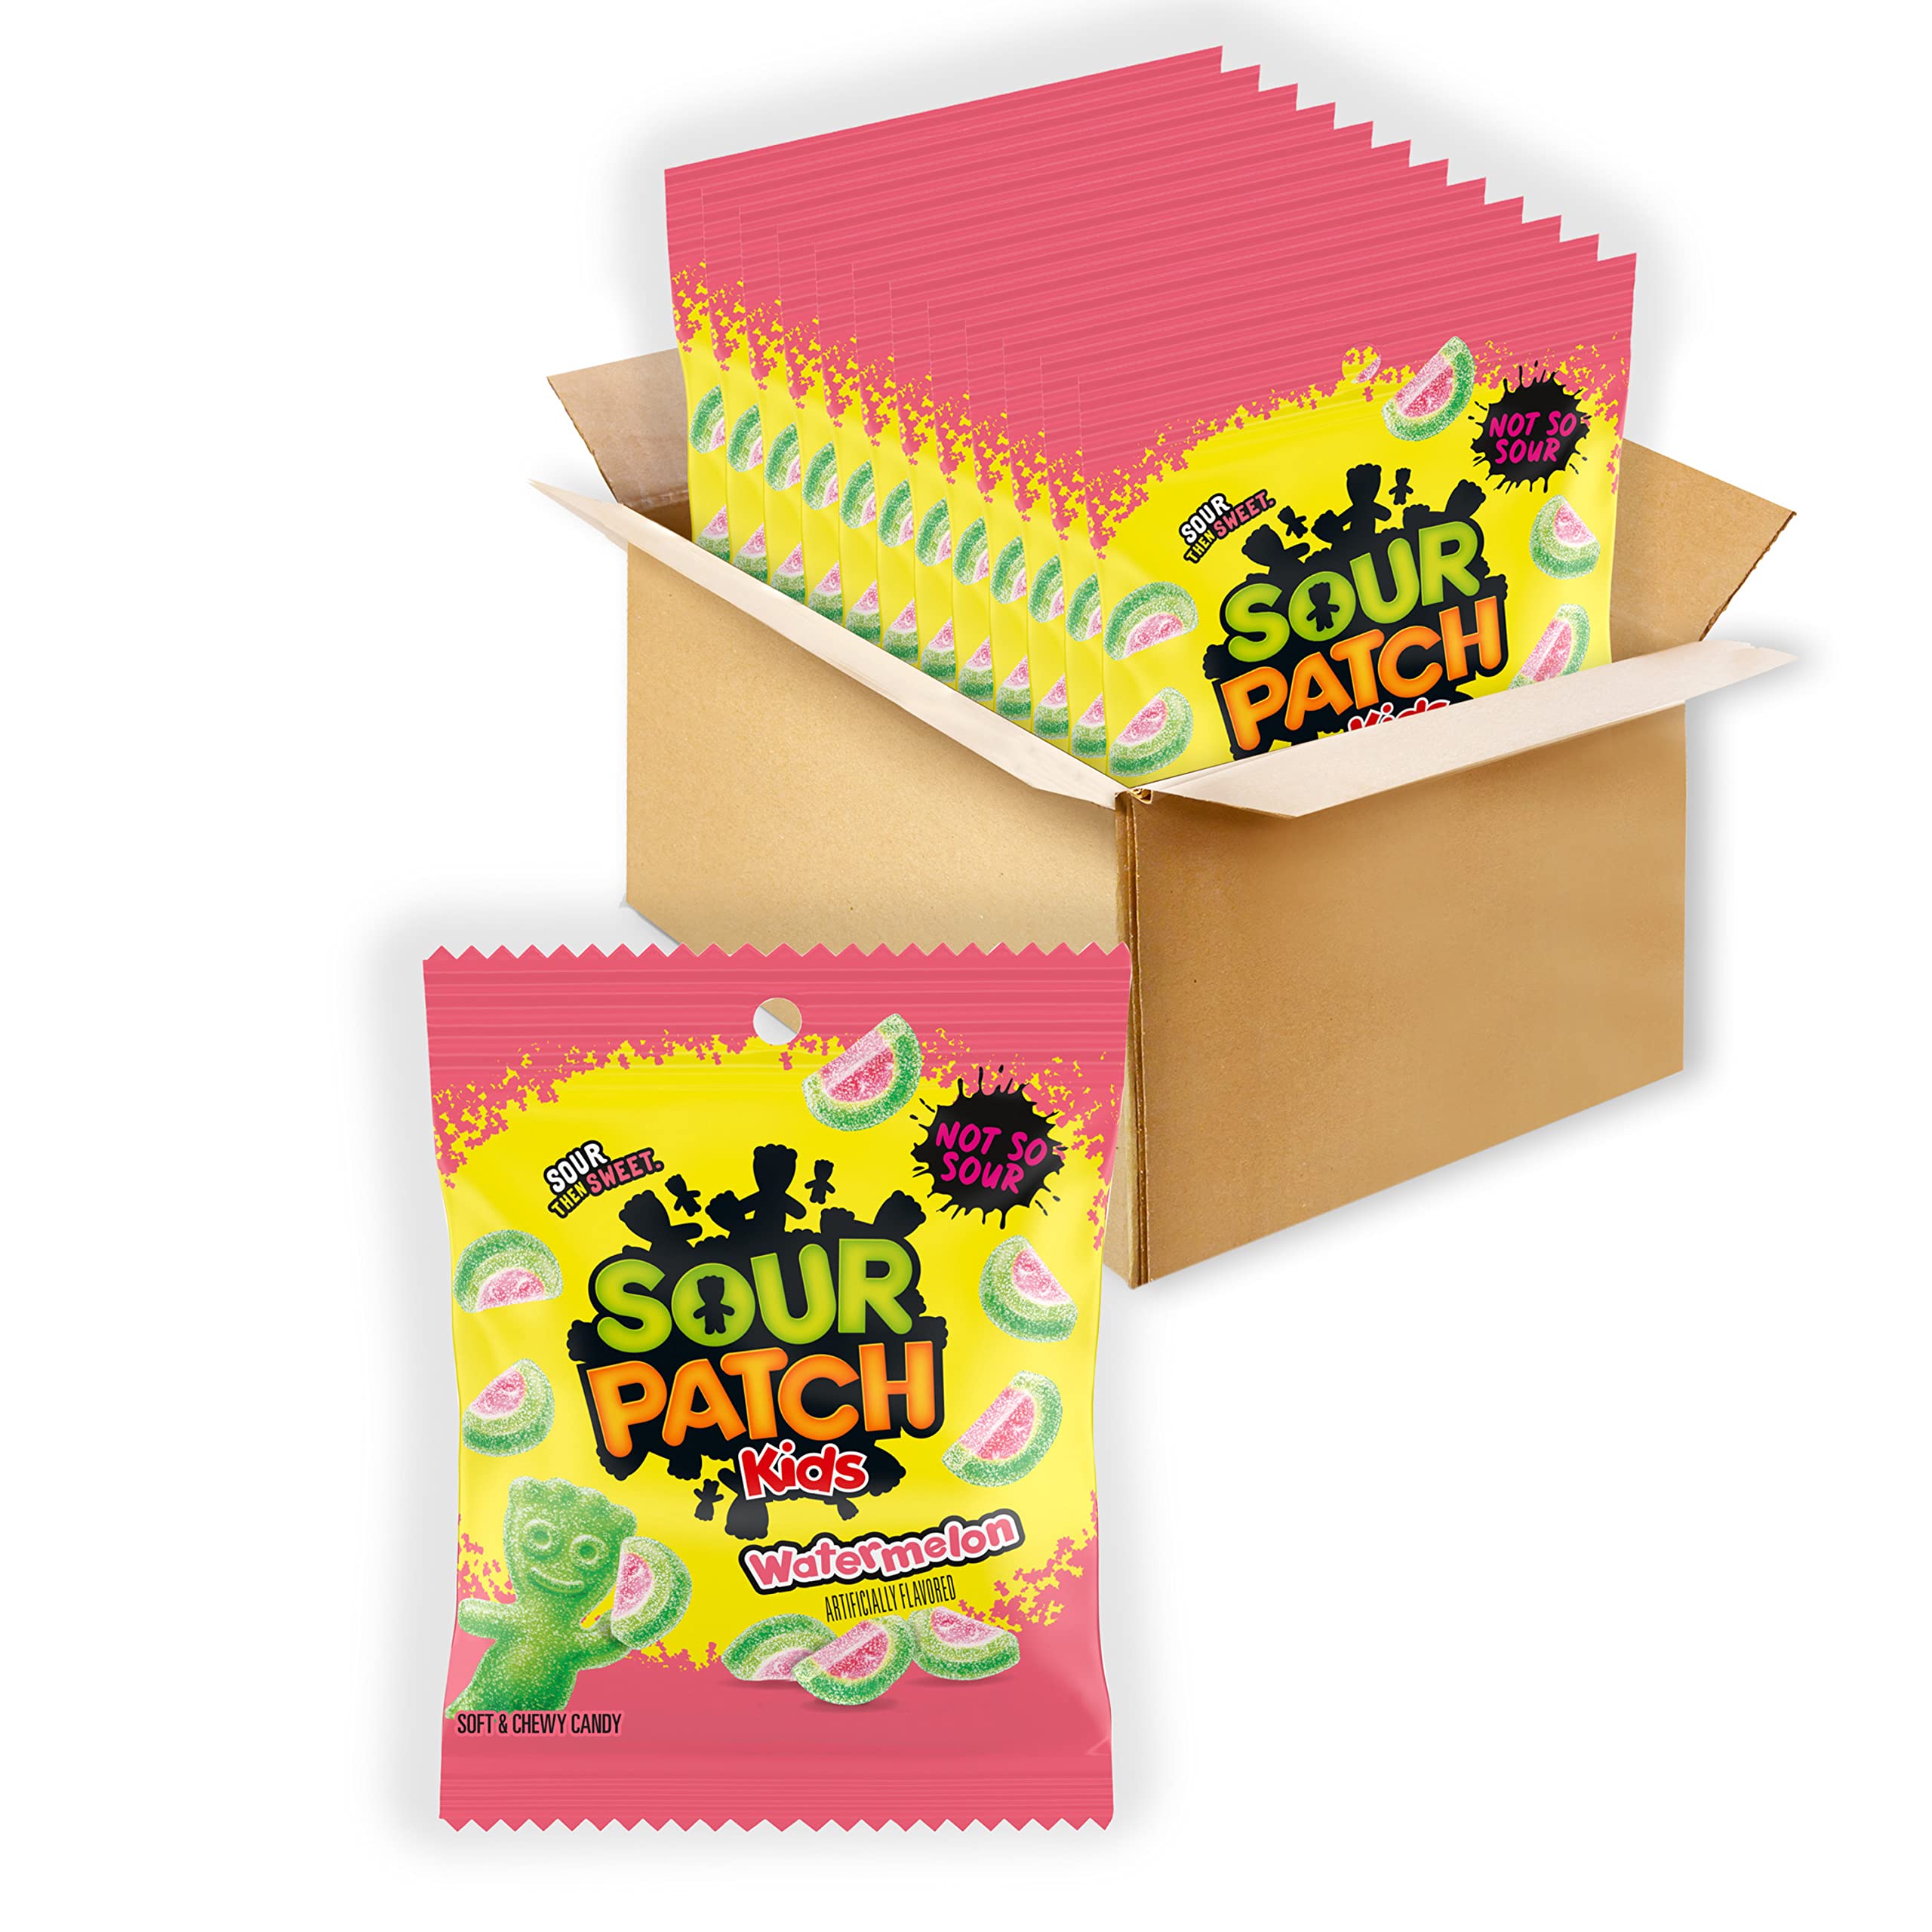 Sour Patch Kids Watermelon Soft & Chewy Candy, 12-3.6 Oz Bags [Subscribe & Save] $9.69